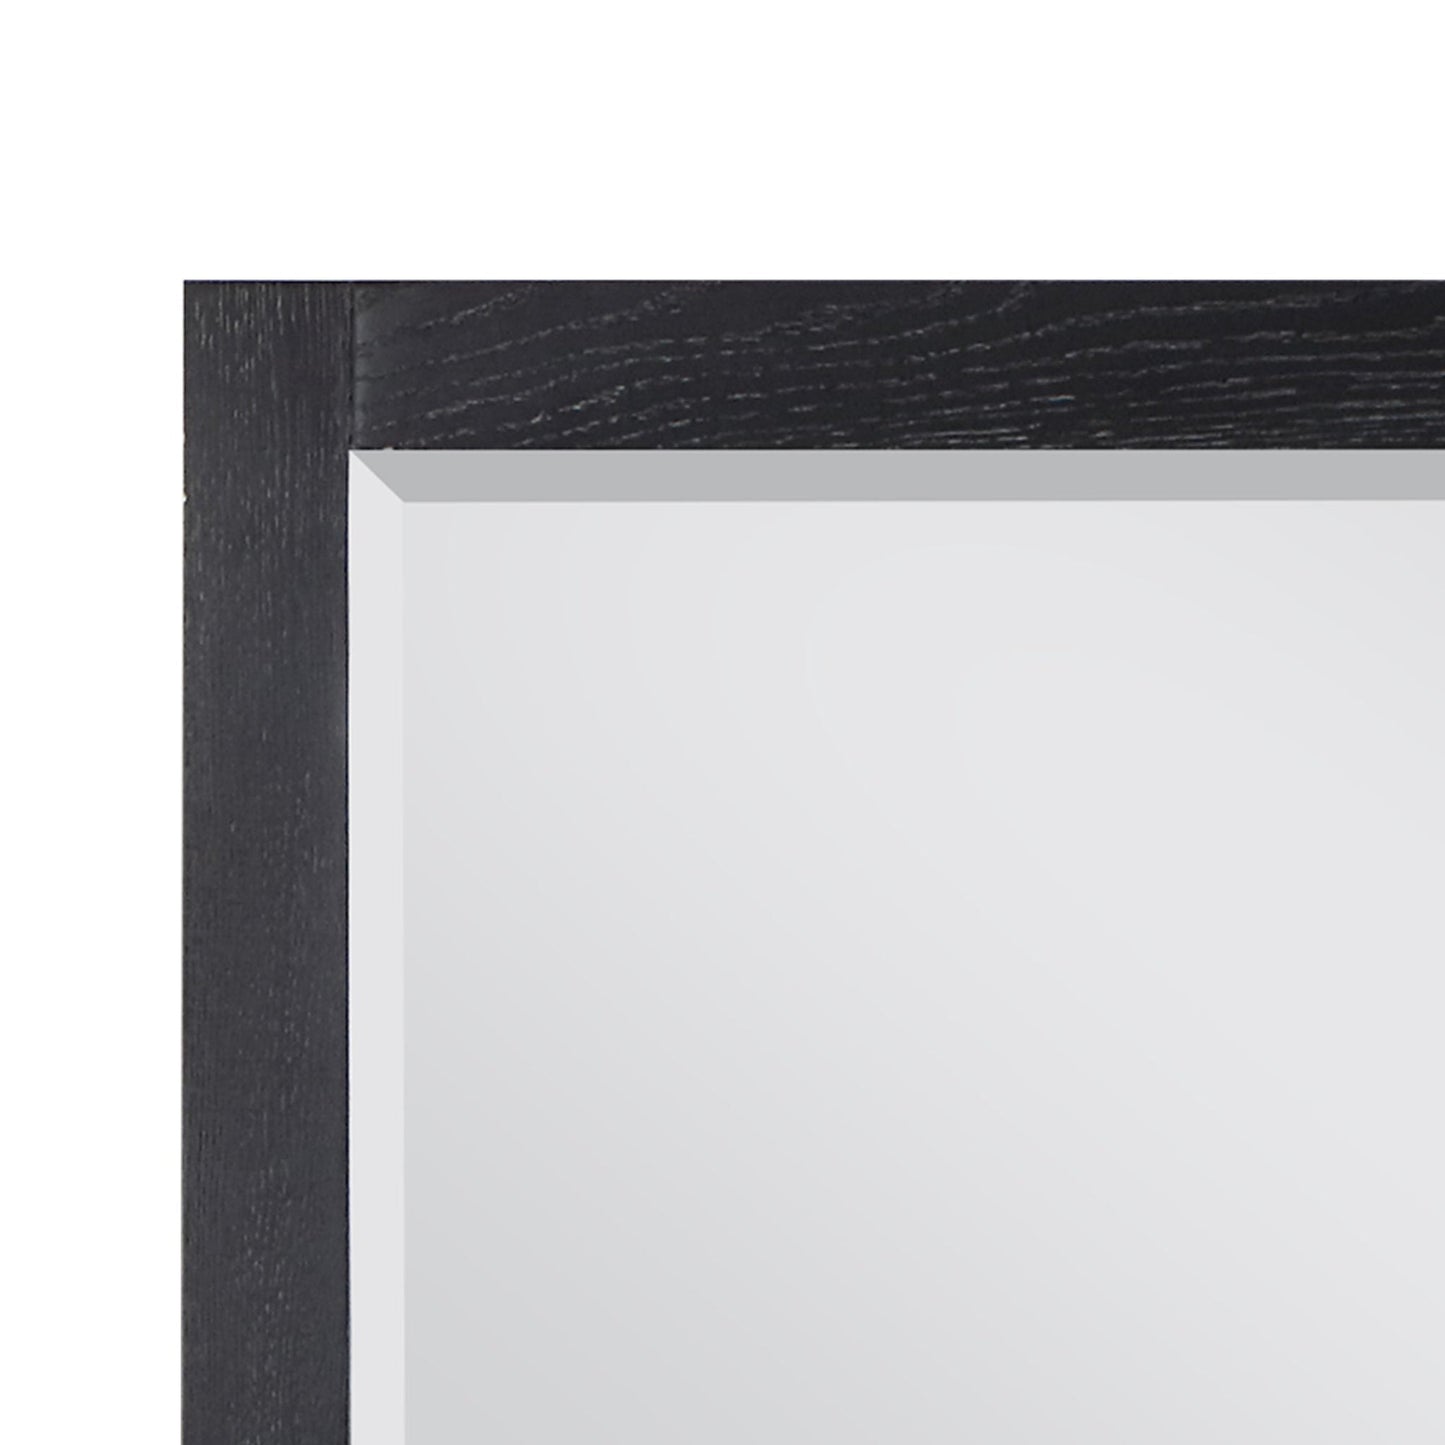 Altair Ivy 48" x 36" Rectangle Black Oak Wood Framed Wall-Mounted Mirror